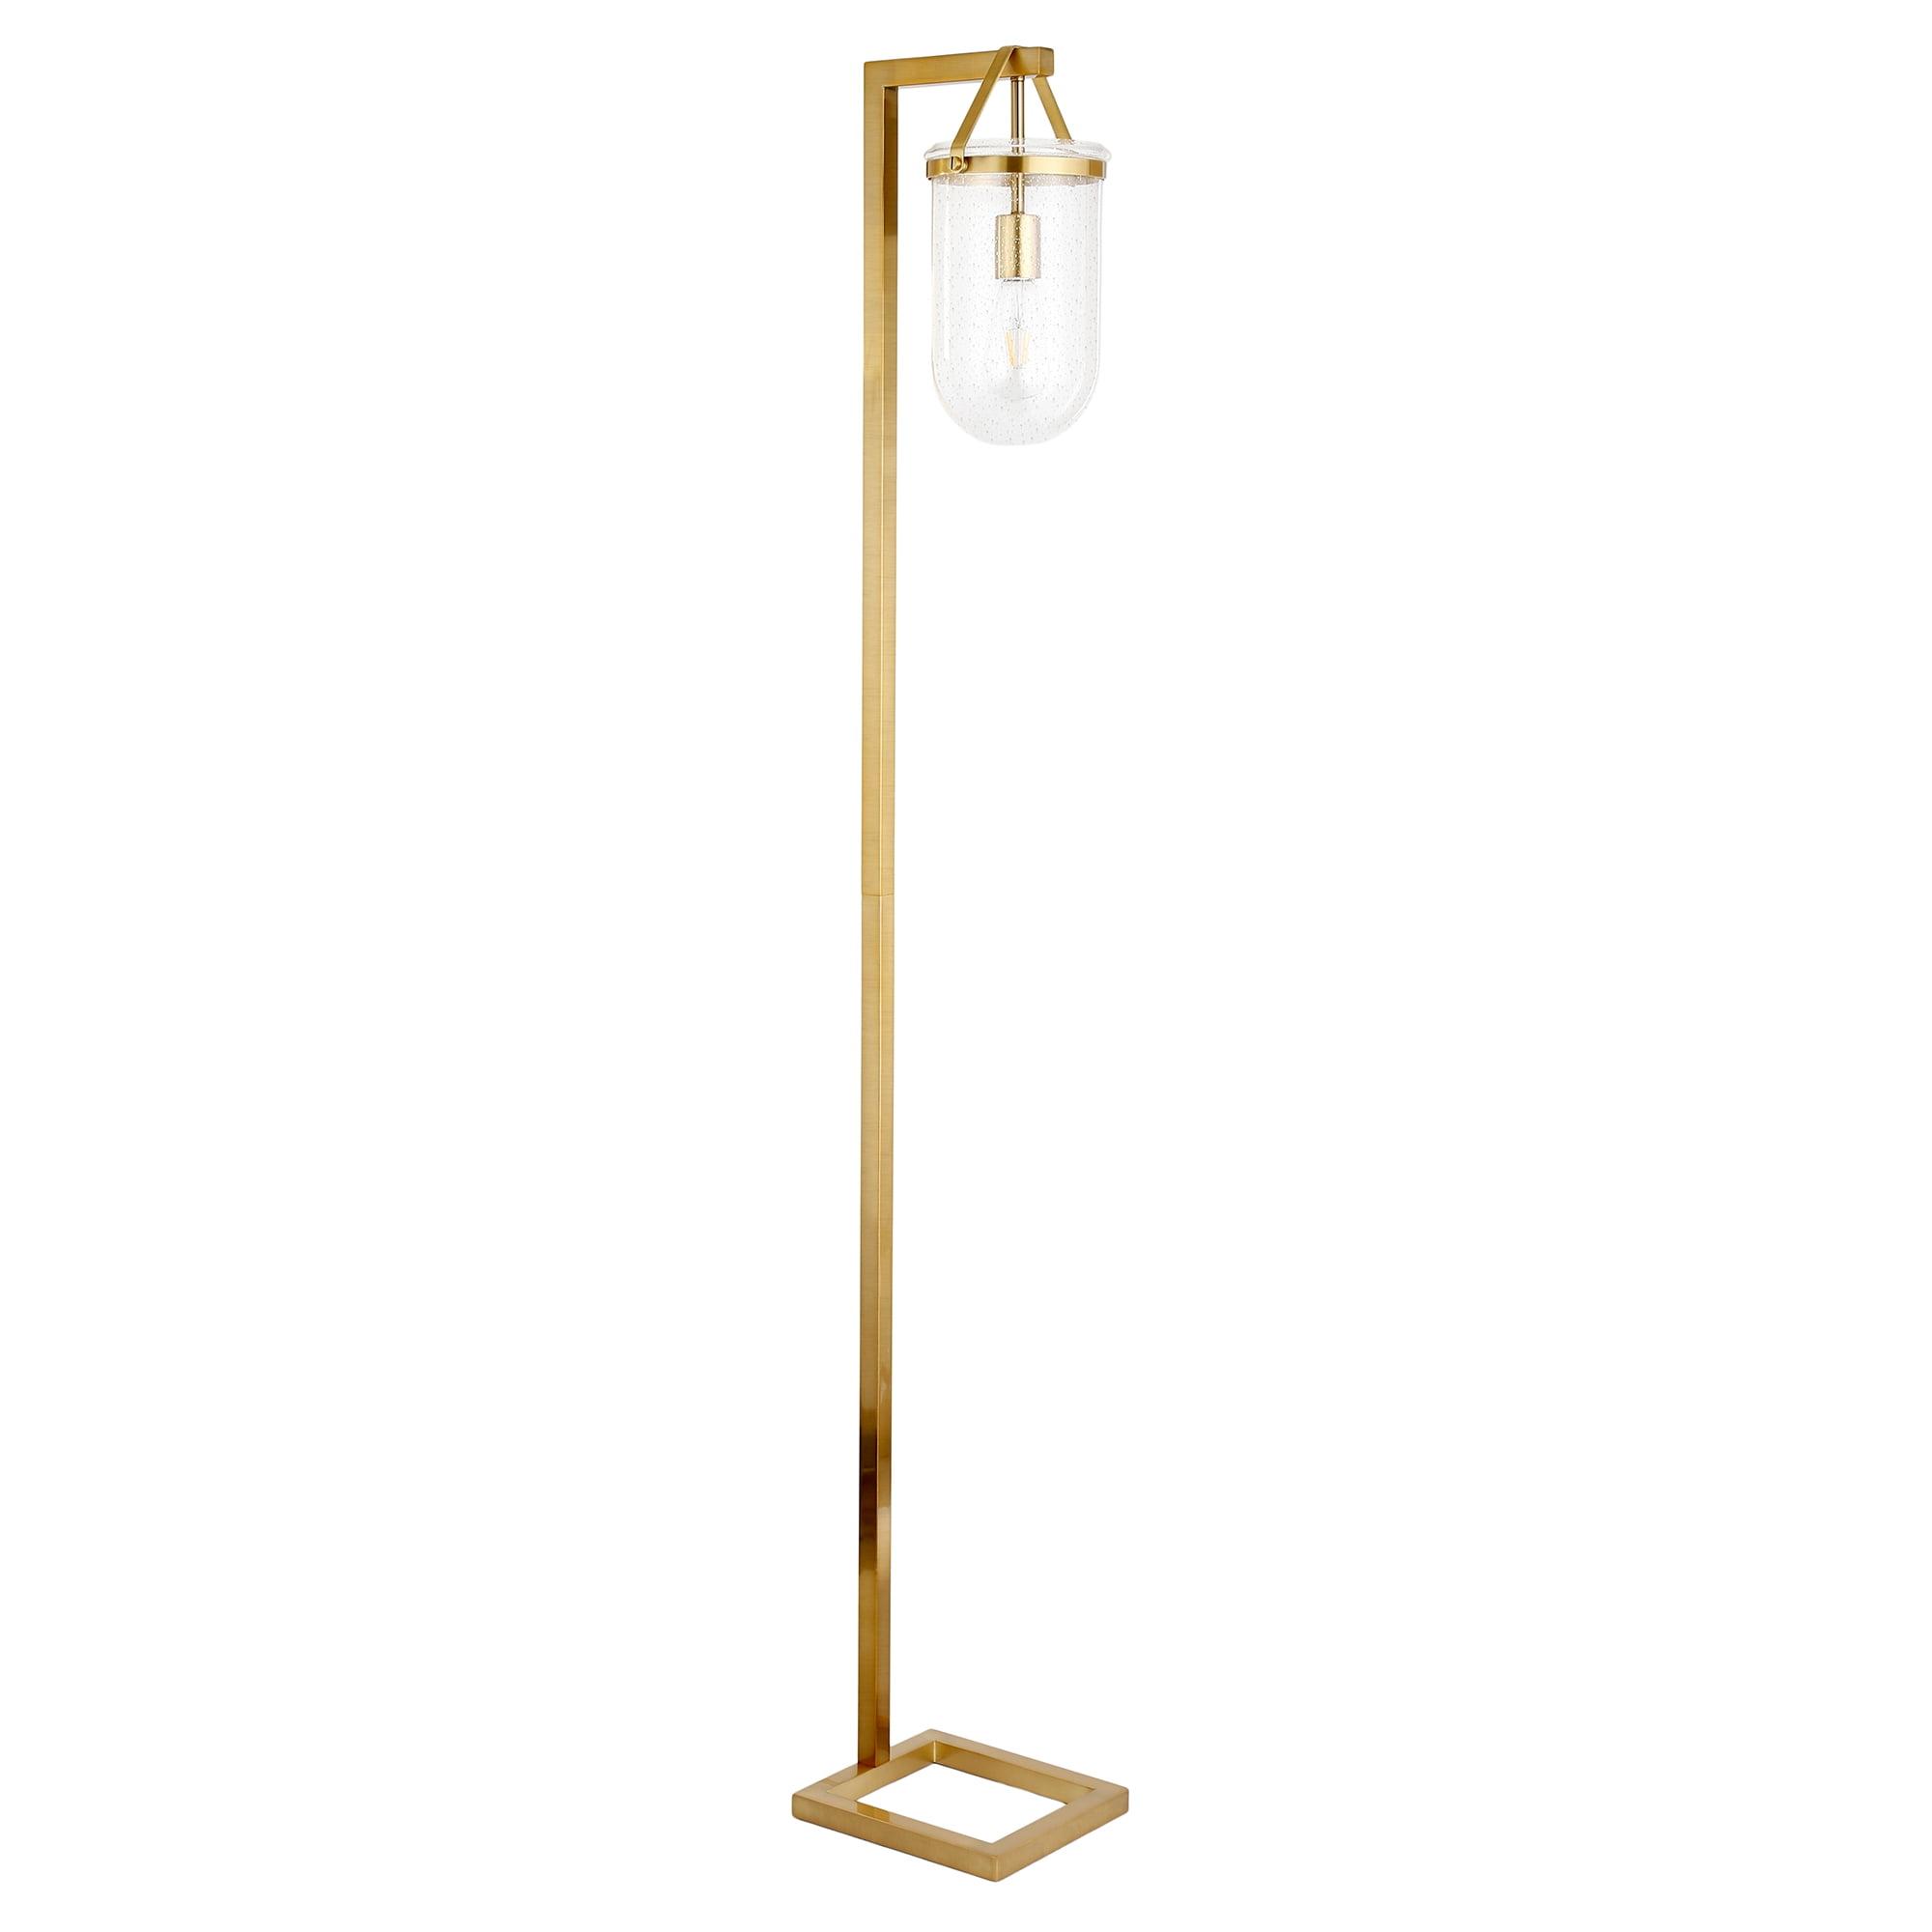 Alexa and Siri Compatible 68" Brass Floor Lamp with Seeded Glass Shade